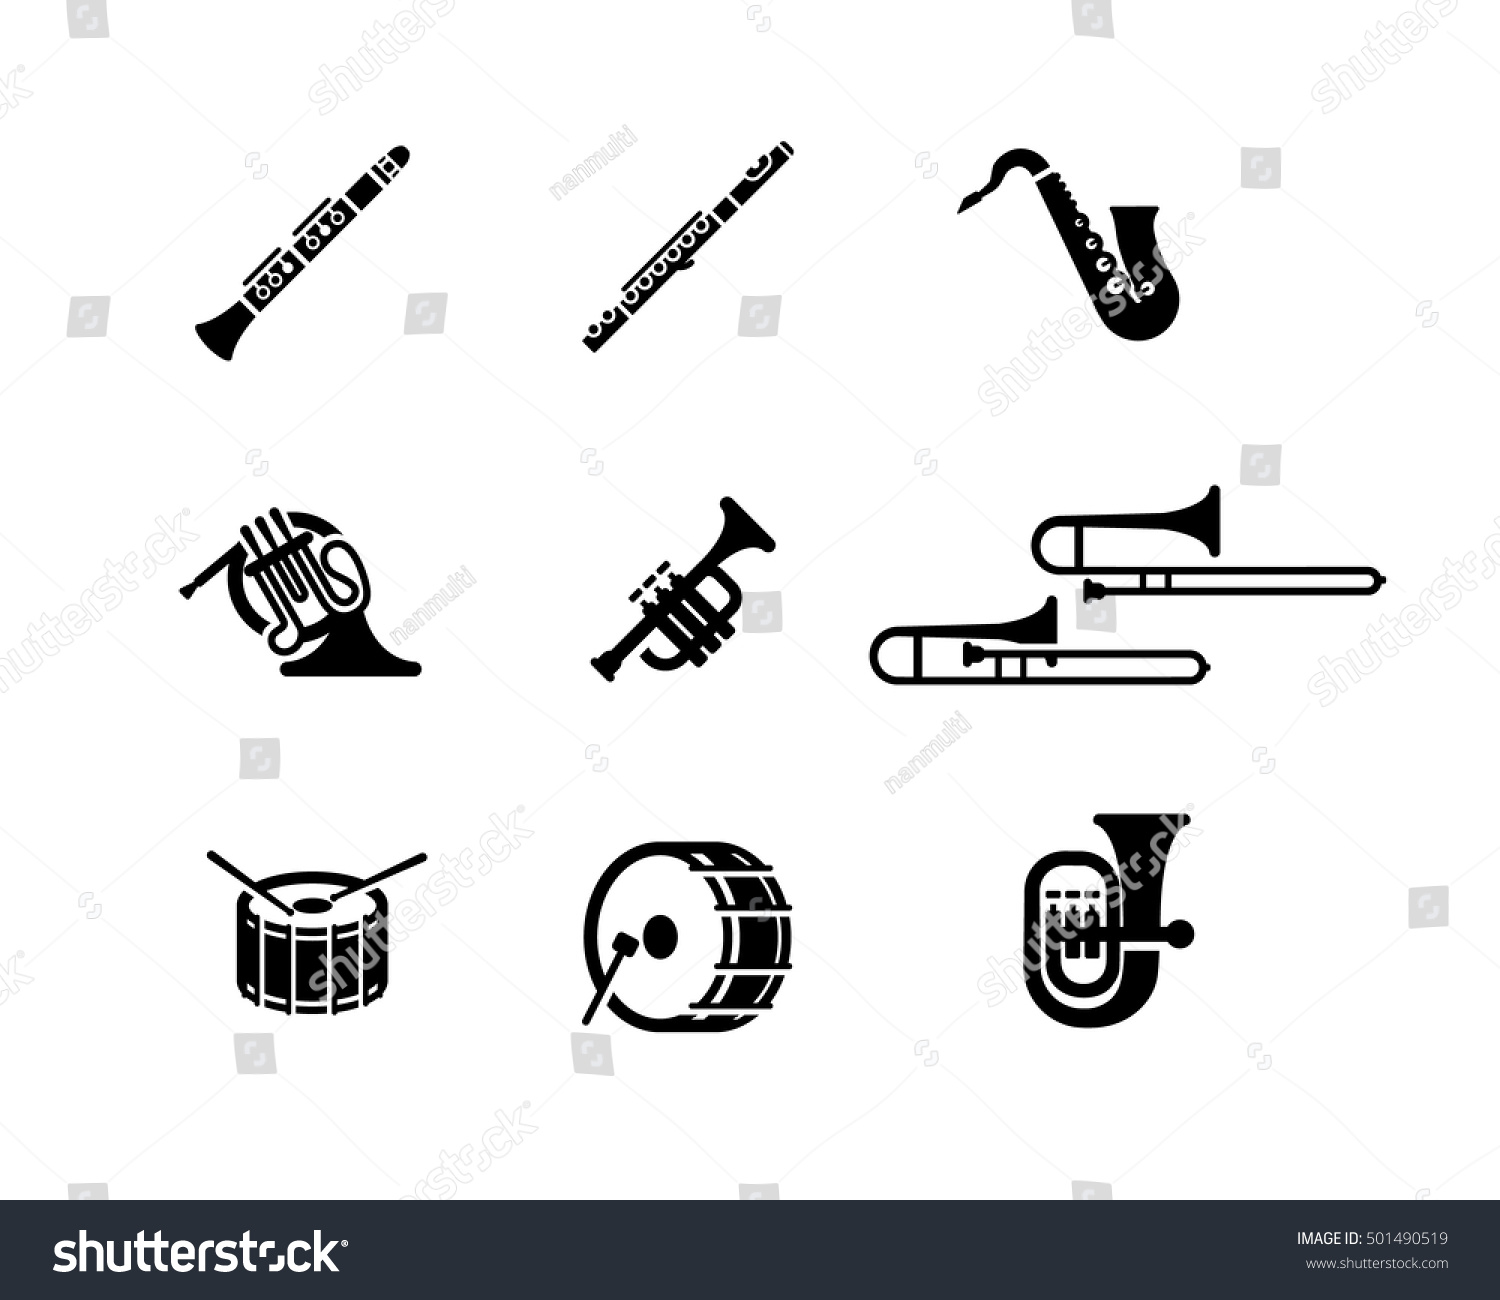 24,750 Marching band instrument Images, Stock Photos & Vectors ...